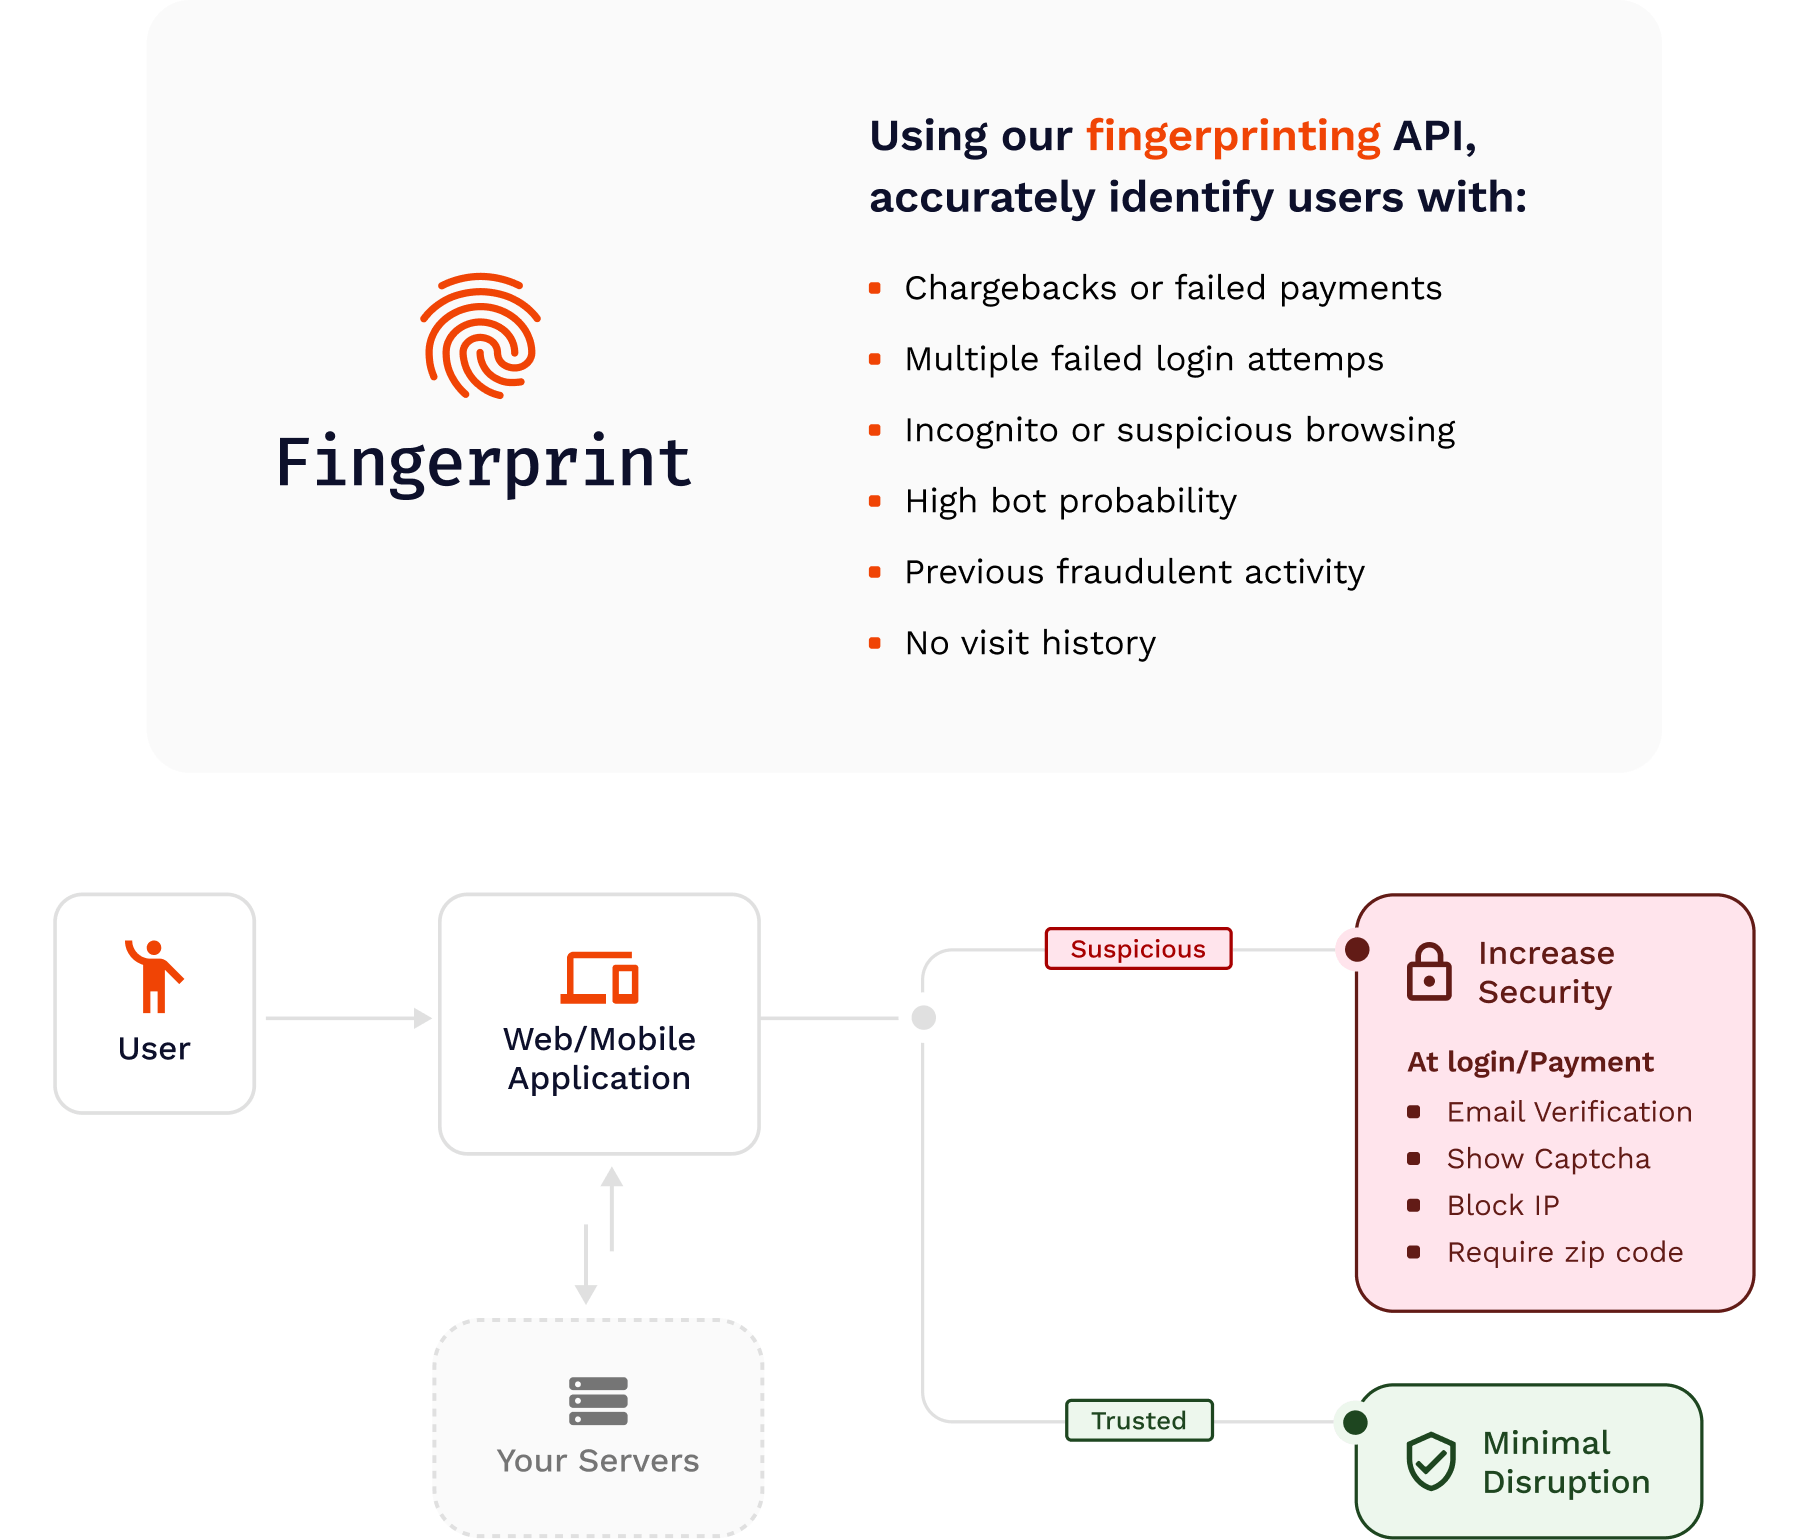 How Fingerprint Pro reduces account takeover